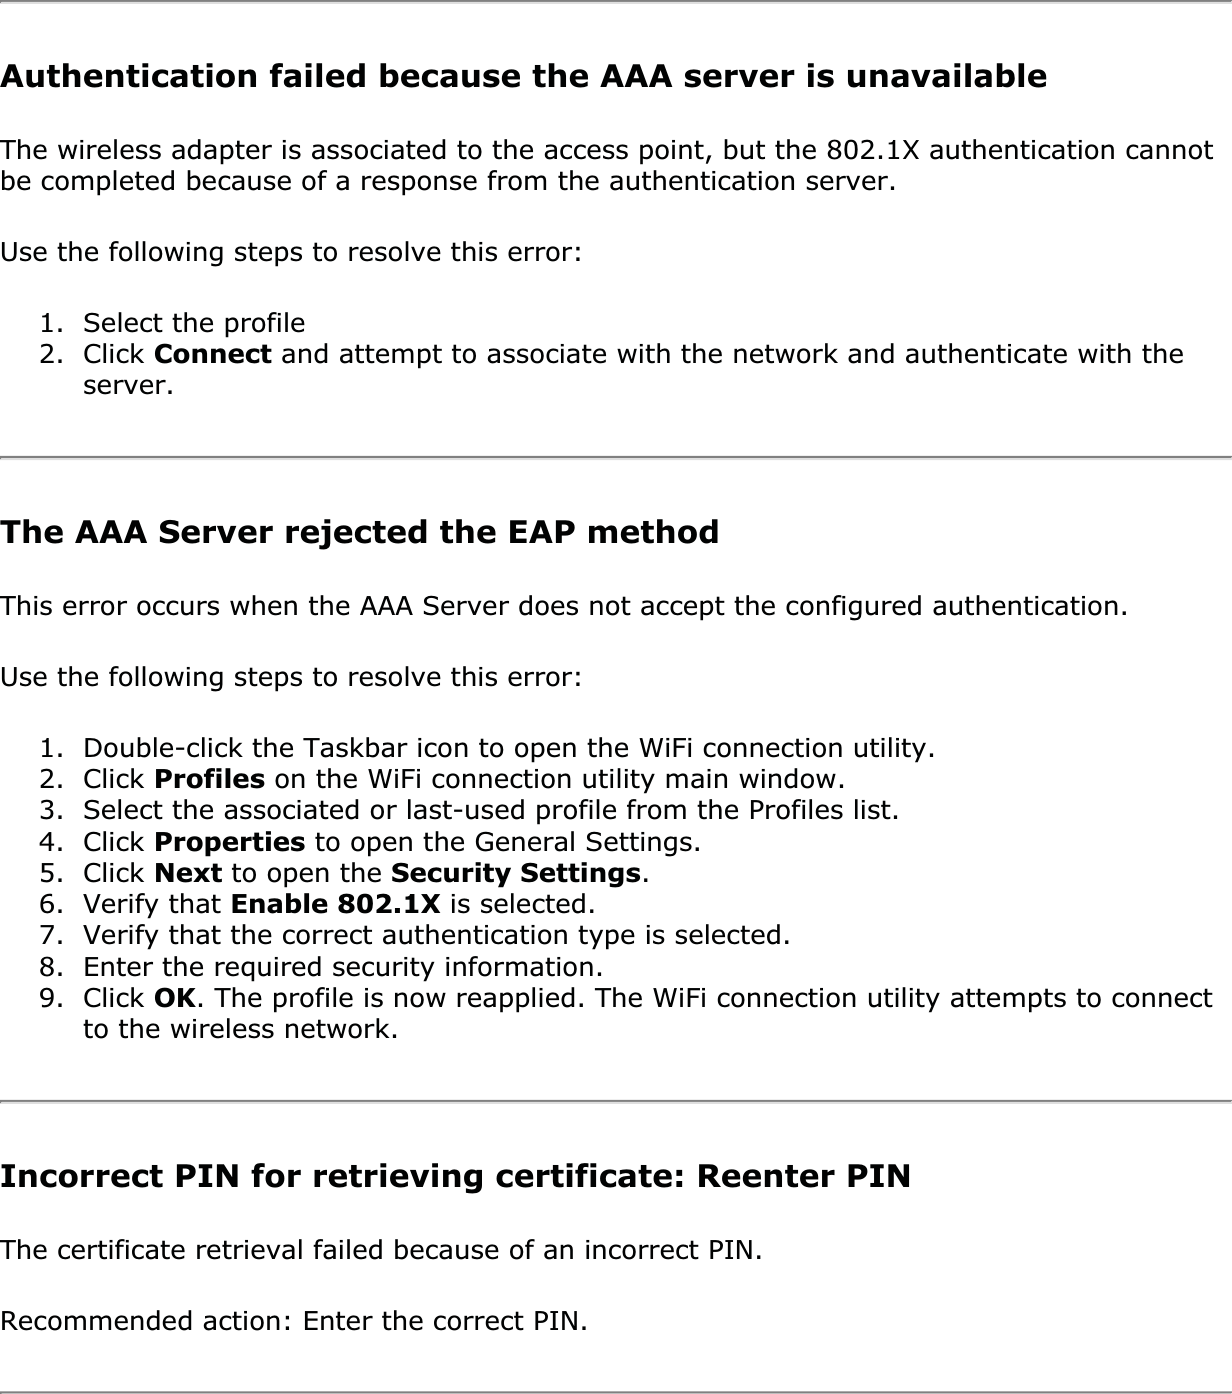 Authentication failed because the AAA server is unavailableThe wireless adapter is associated to the access point, but the 802.1X authentication cannot be completed because of a response from the authentication server. Use the following steps to resolve this error: 1. Select the profile2. Click Connect and attempt to associate with the network and authenticate with the server.The AAA Server rejected the EAP methodThis error occurs when the AAA Server does not accept the configured authentication. Use the following steps to resolve this error: 1. Double-click the Taskbar icon to open the WiFi connection utility.2. Click Profiles on the WiFi connection utility main window.3. Select the associated or last-used profile from the Profiles list. 4. Click Properties to open the General Settings.5. Click Next to open the Security Settings.6. Verify that Enable 802.1X is selected. 7. Verify that the correct authentication type is selected. 8. Enter the required security information. 9. Click OK. The profile is now reapplied. The WiFi connection utility attempts to connect to the wireless network. Incorrect PIN for retrieving certificate: Reenter PIN The certificate retrieval failed because of an incorrect PIN. Recommended action: Enter the correct PIN. 